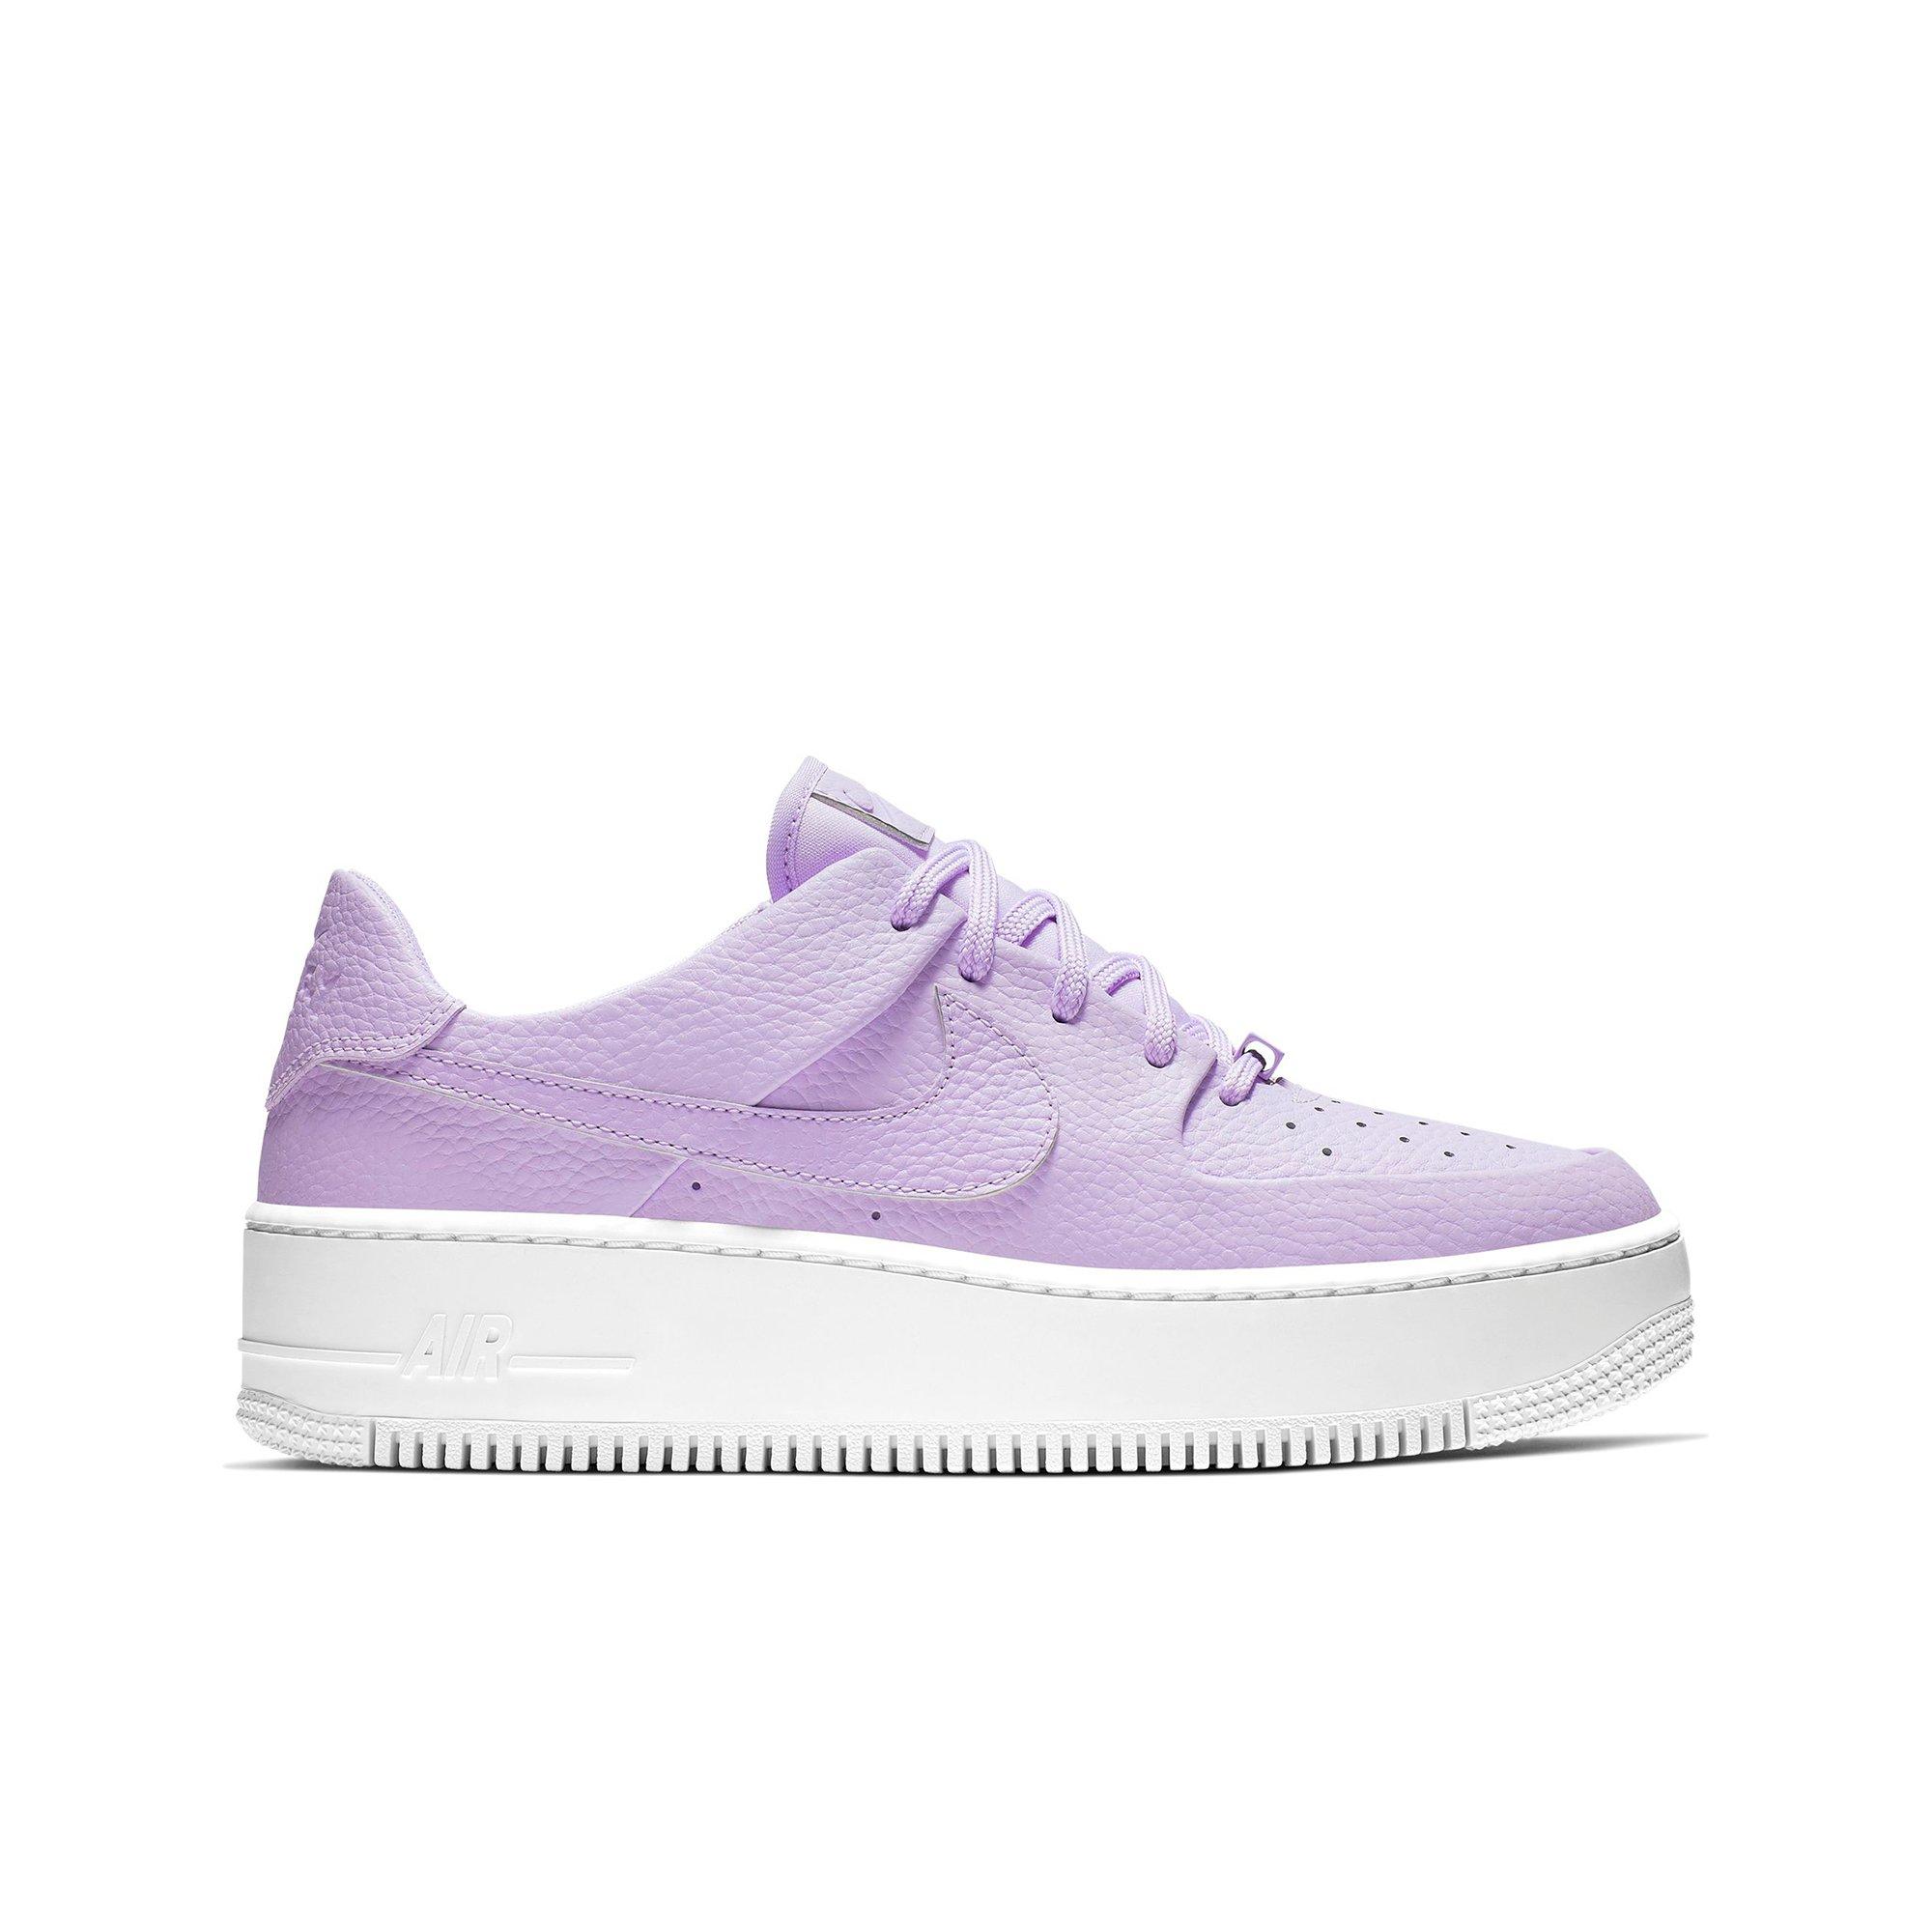 light パープル air force 1 authentic 